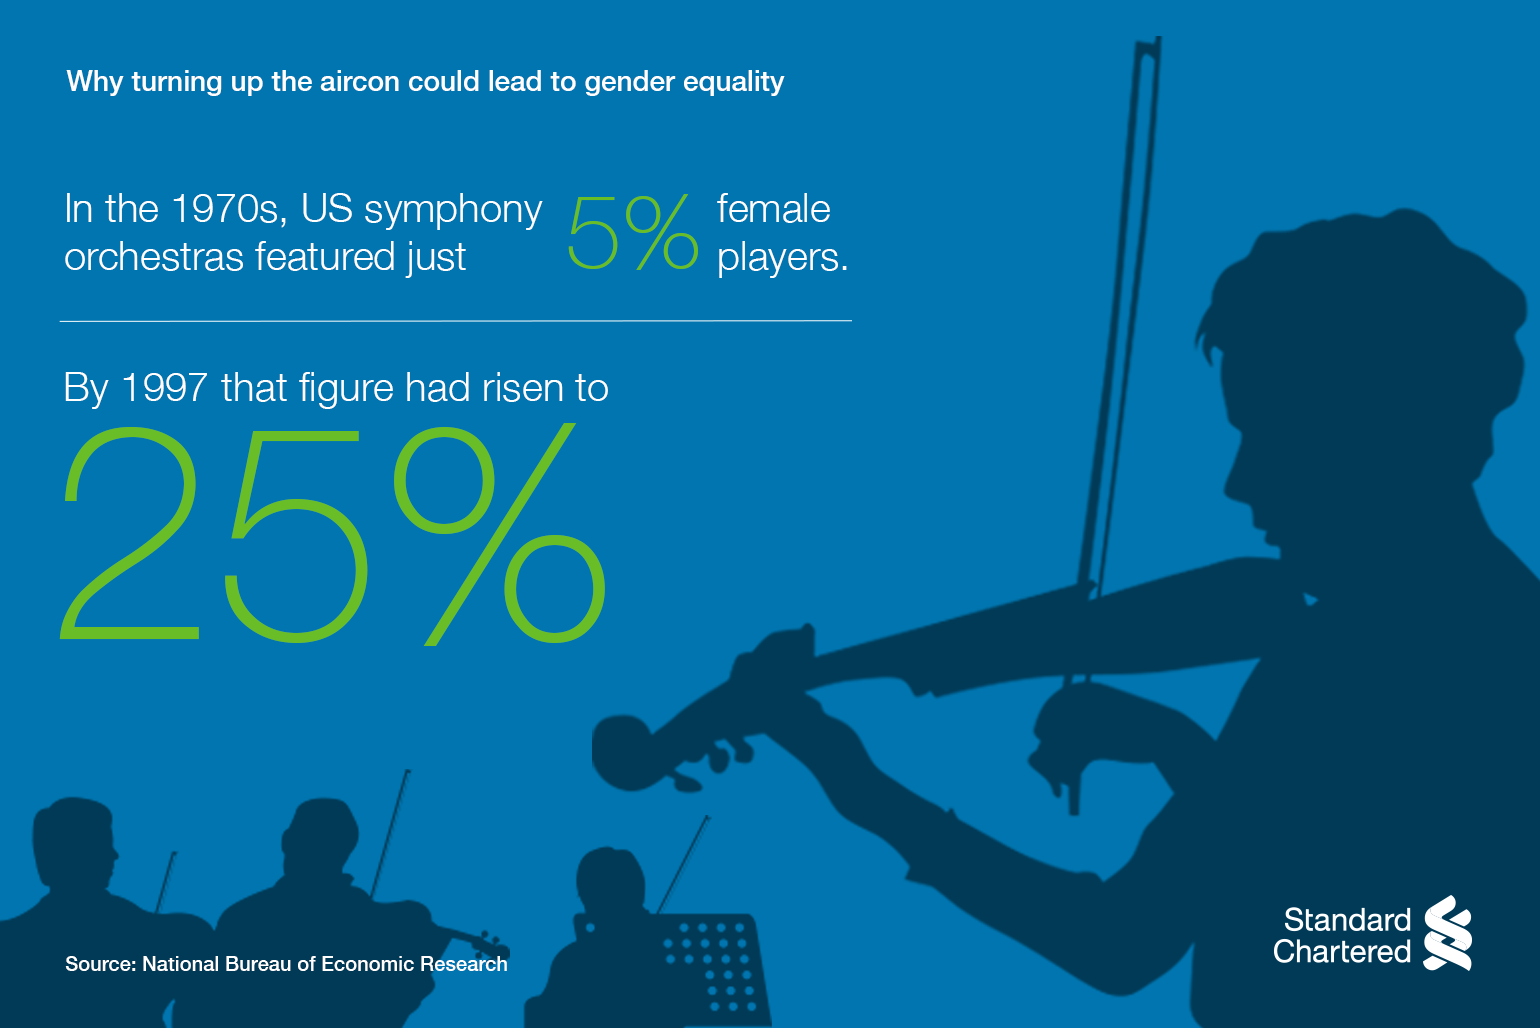 In the 1970s, US symphony orchestras featured just 5% of female players.